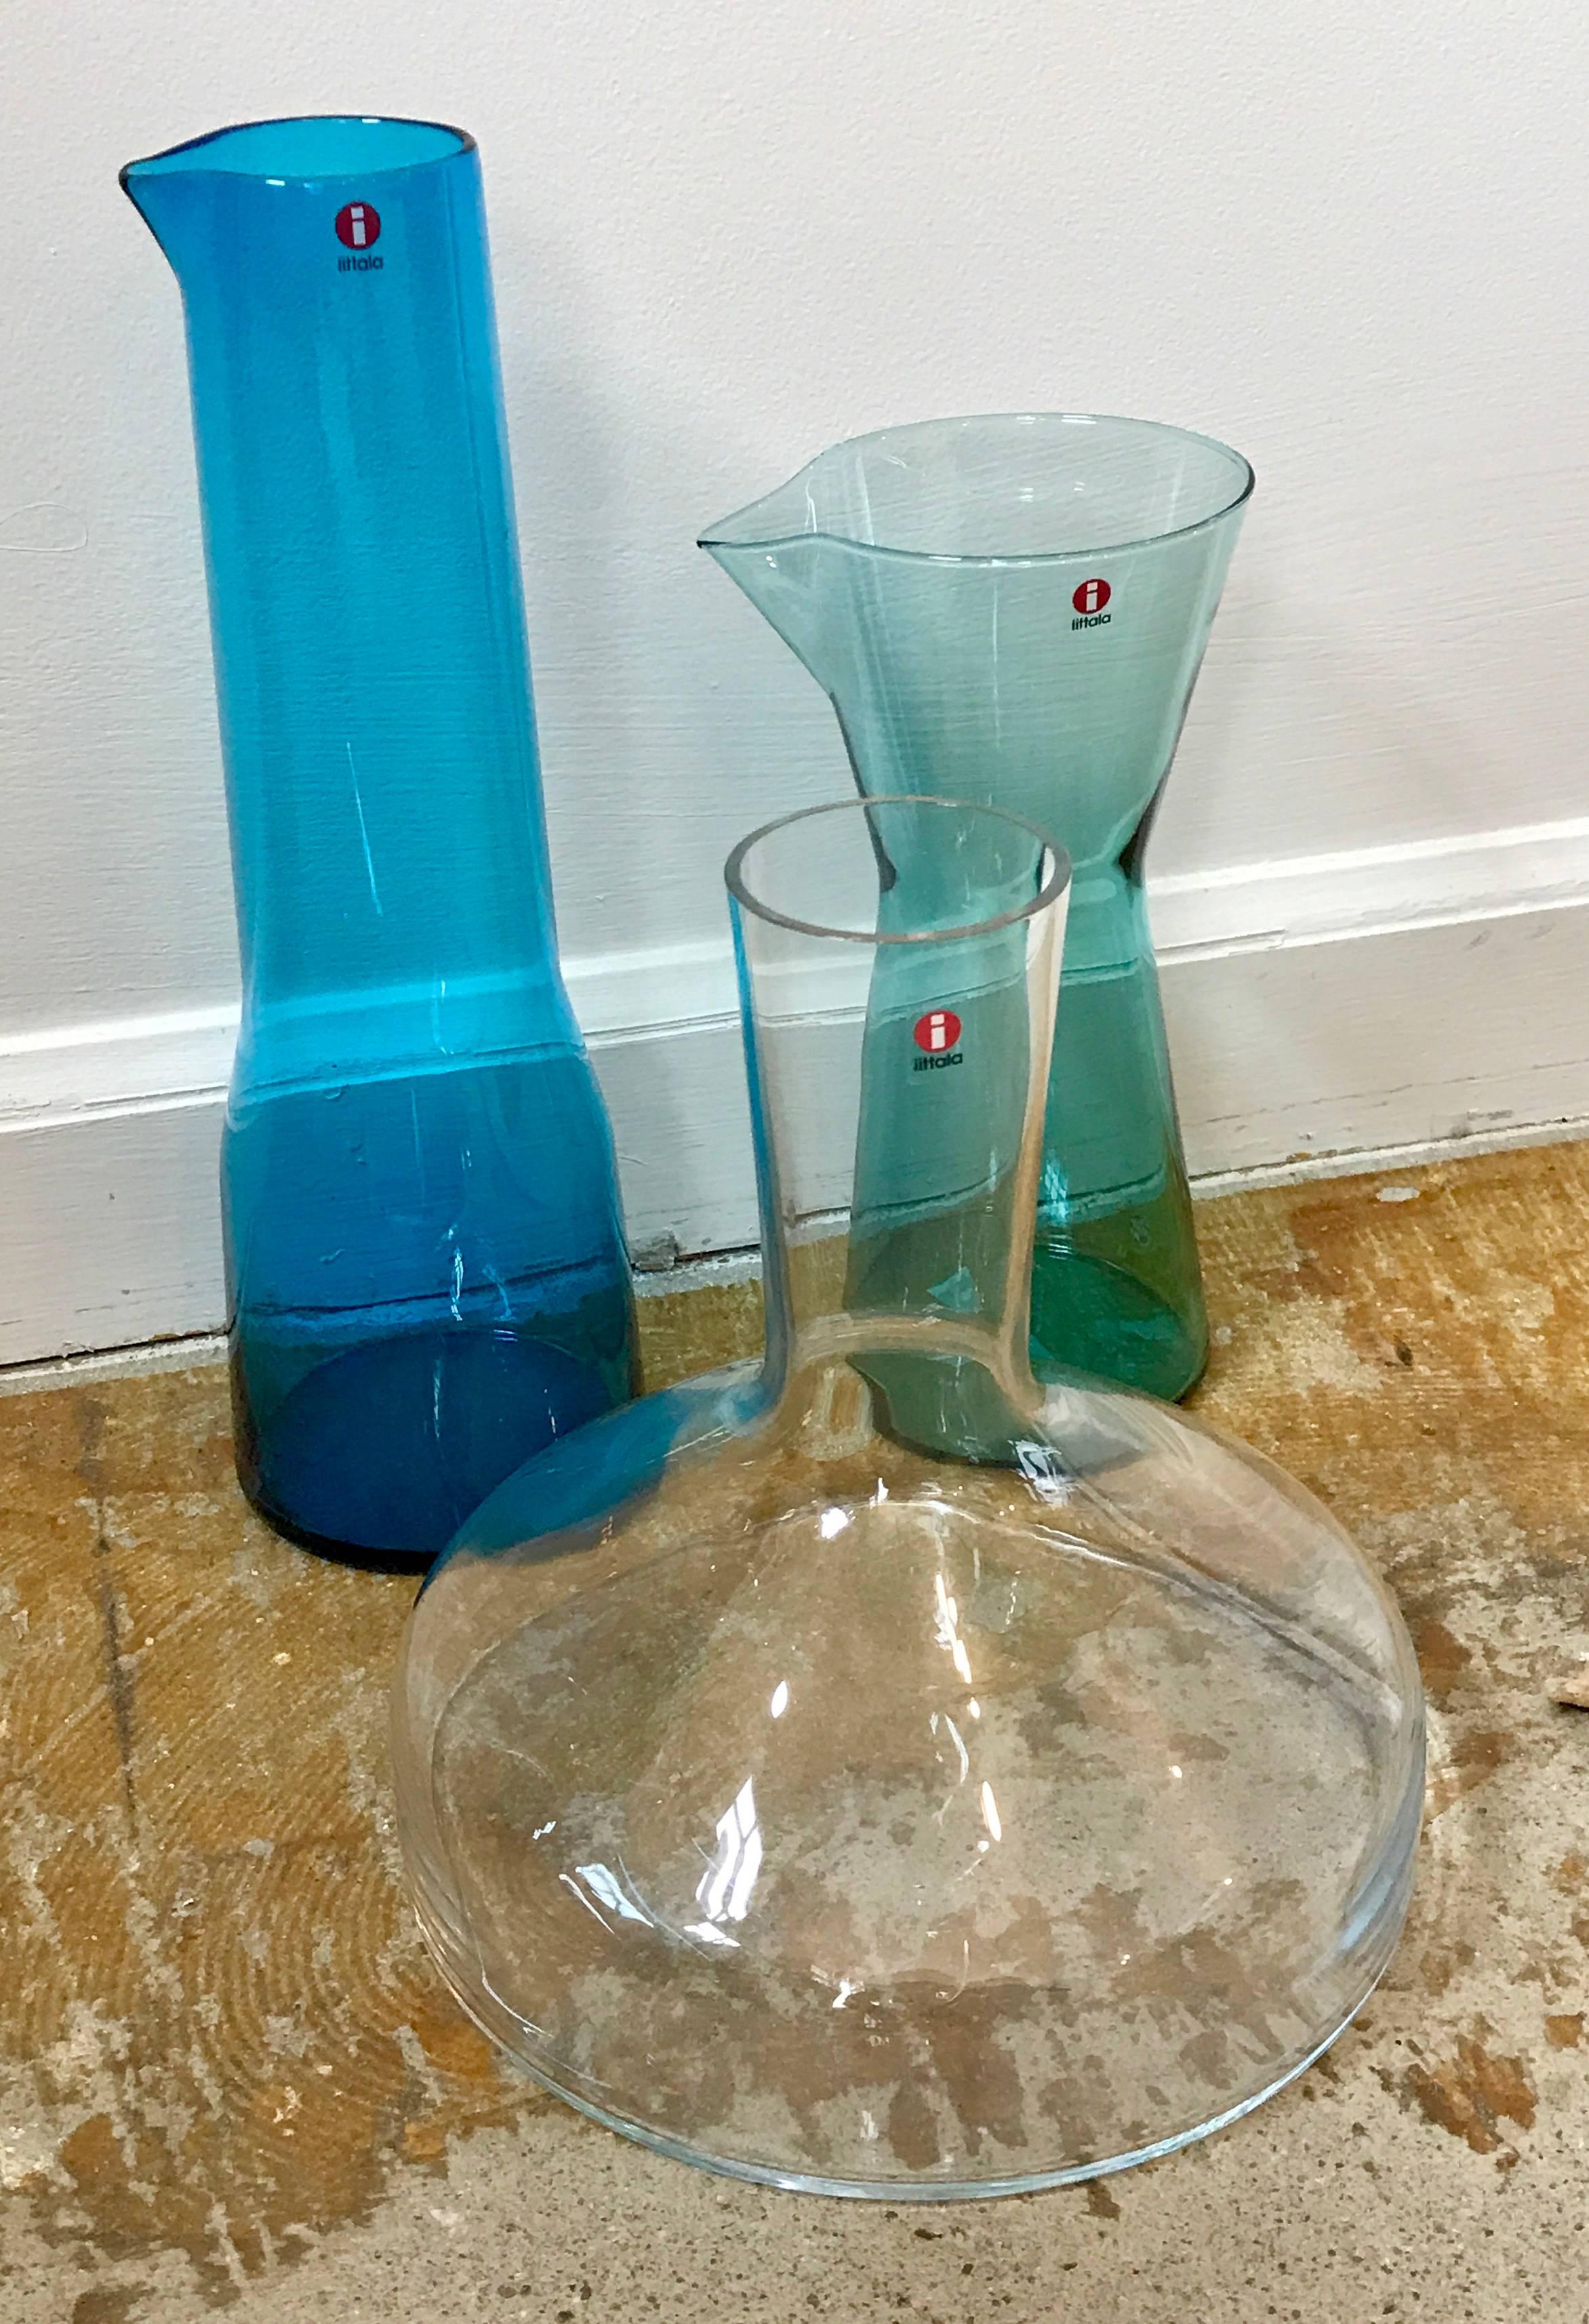 Set of three Iittala Finland decanters in like new unused condition. Consisting of one wine decanter and two beverage vessels. Iconic design by Kaj Franck.